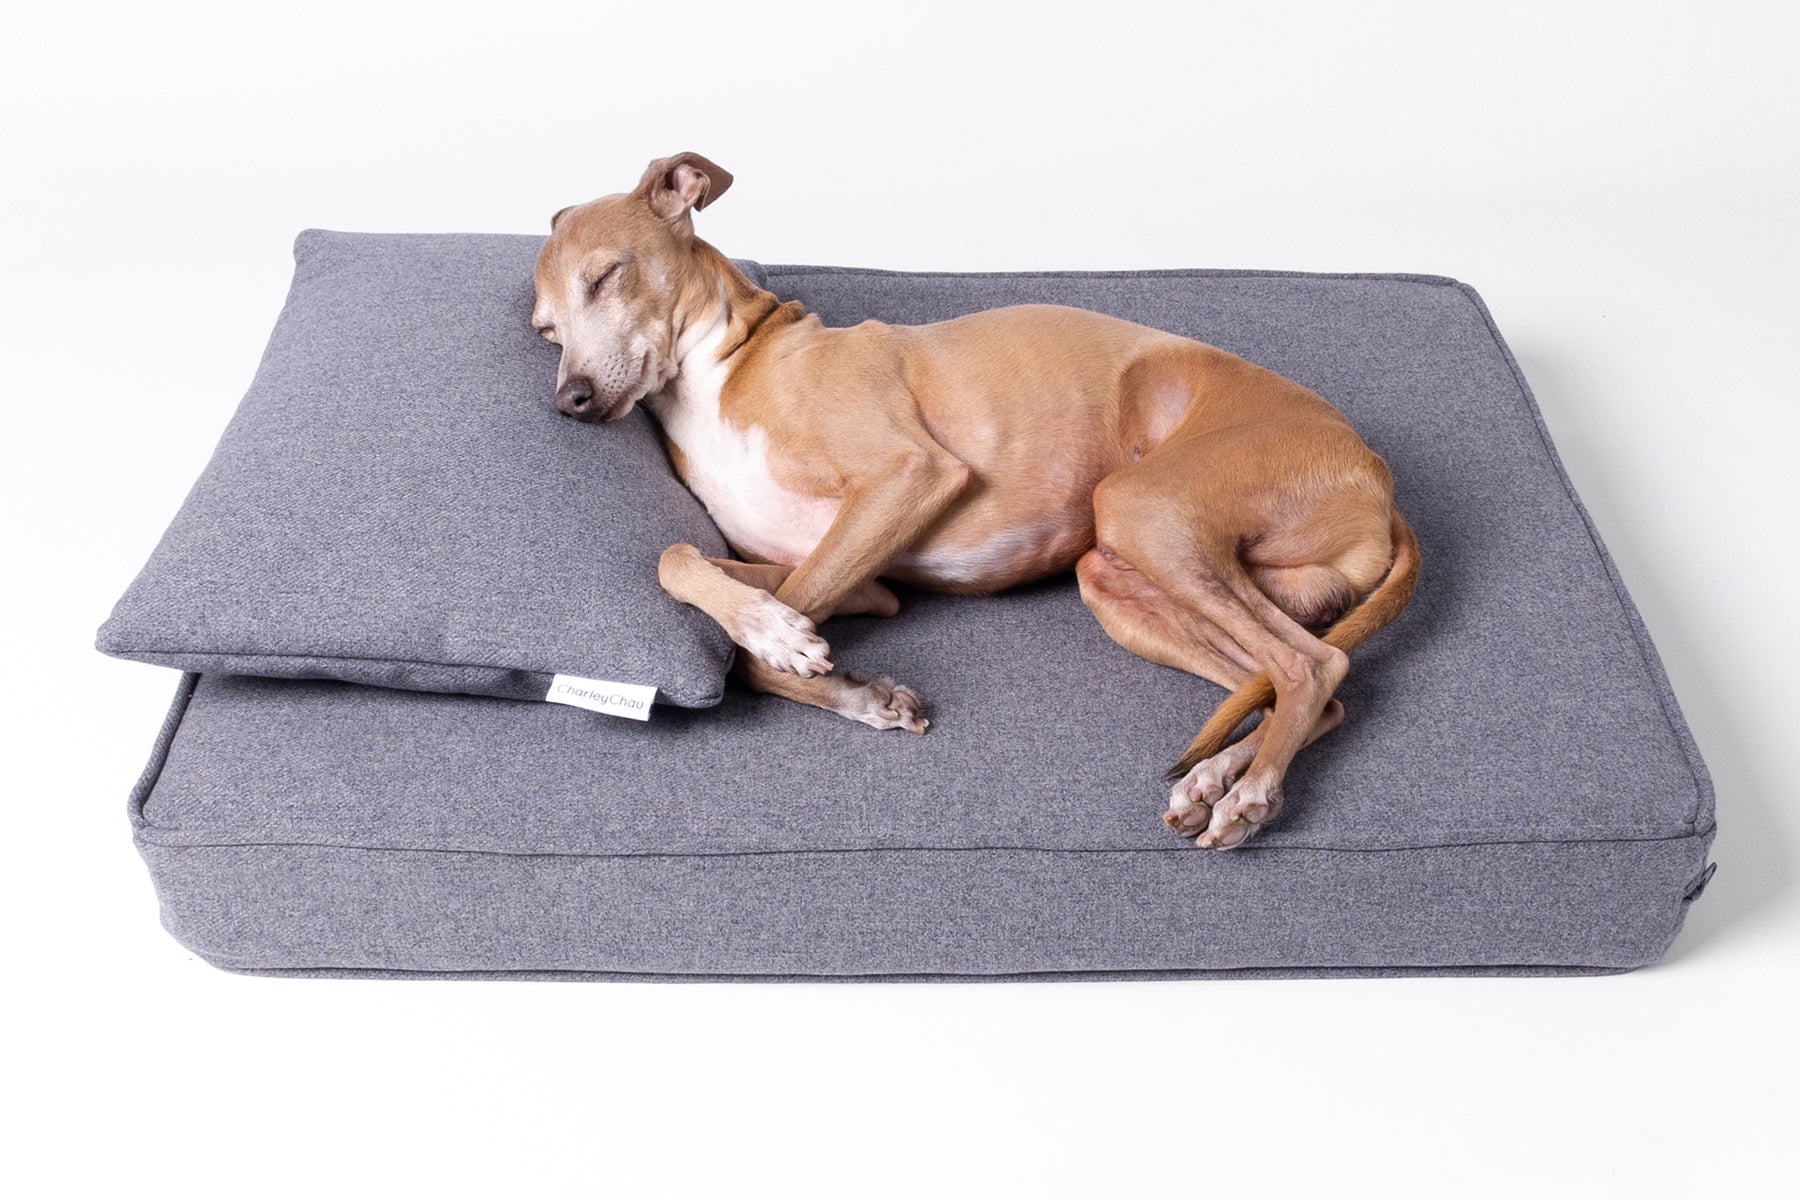 Win a luxe Anti-Microbial Memory Foam Mattress for your dog worth up to £390